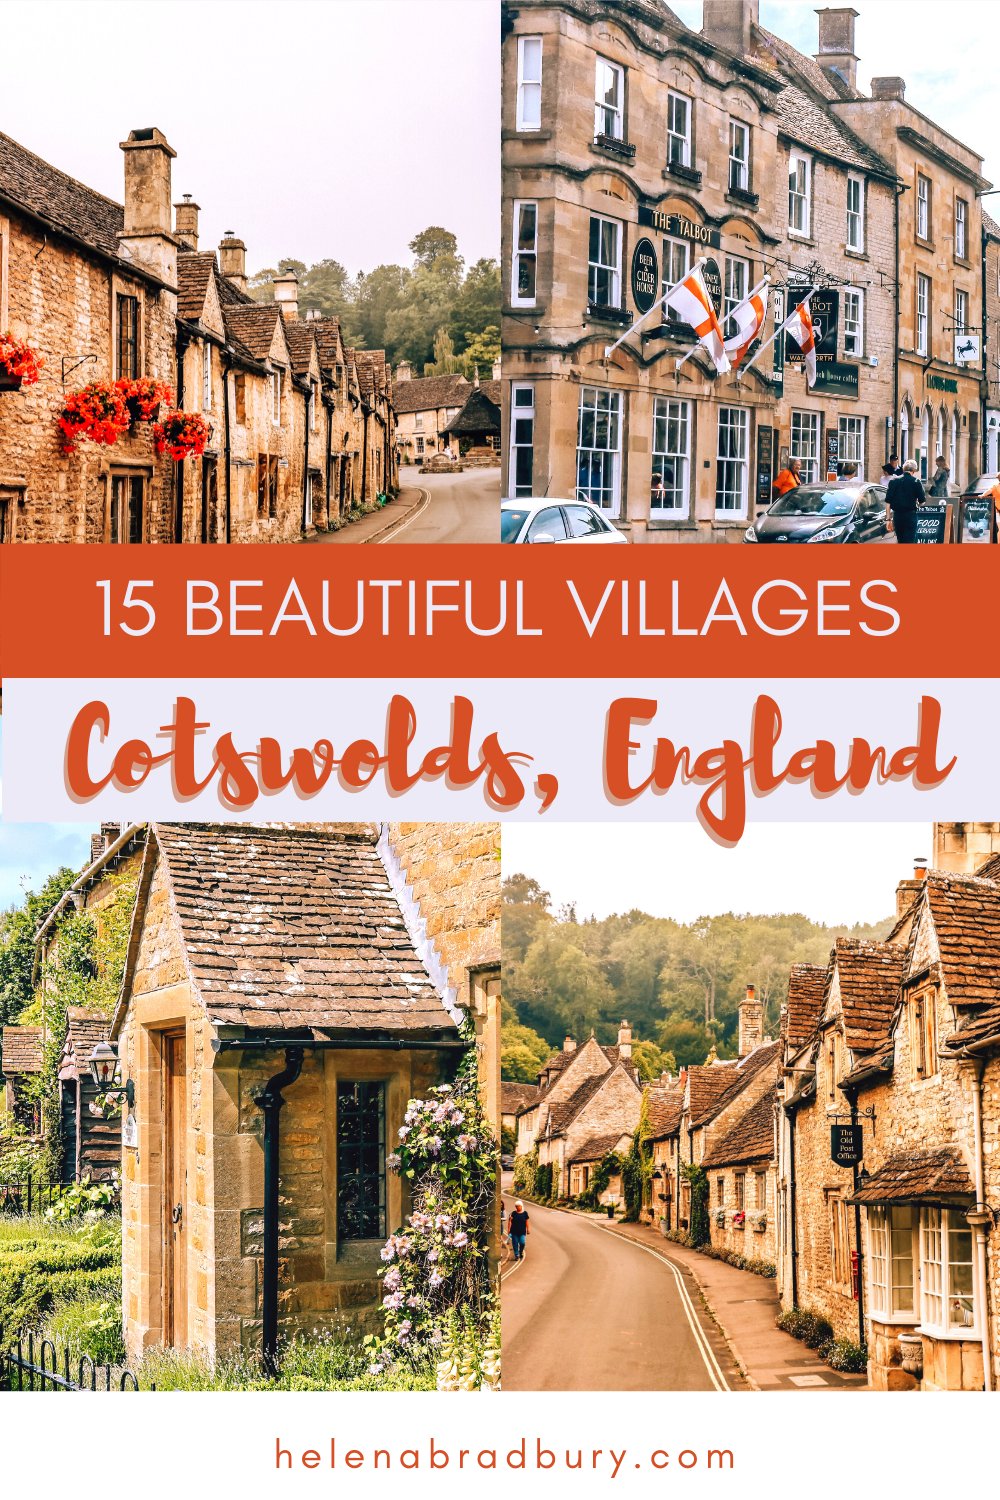 15 beautiful villages to visit in the Cotswolds and the best places to visit in the Cotswolds for your trip | best villages in the cotswolds | most beautiful cotswolds villages | best villages in the cotswolds | top cotswold villages | best villages